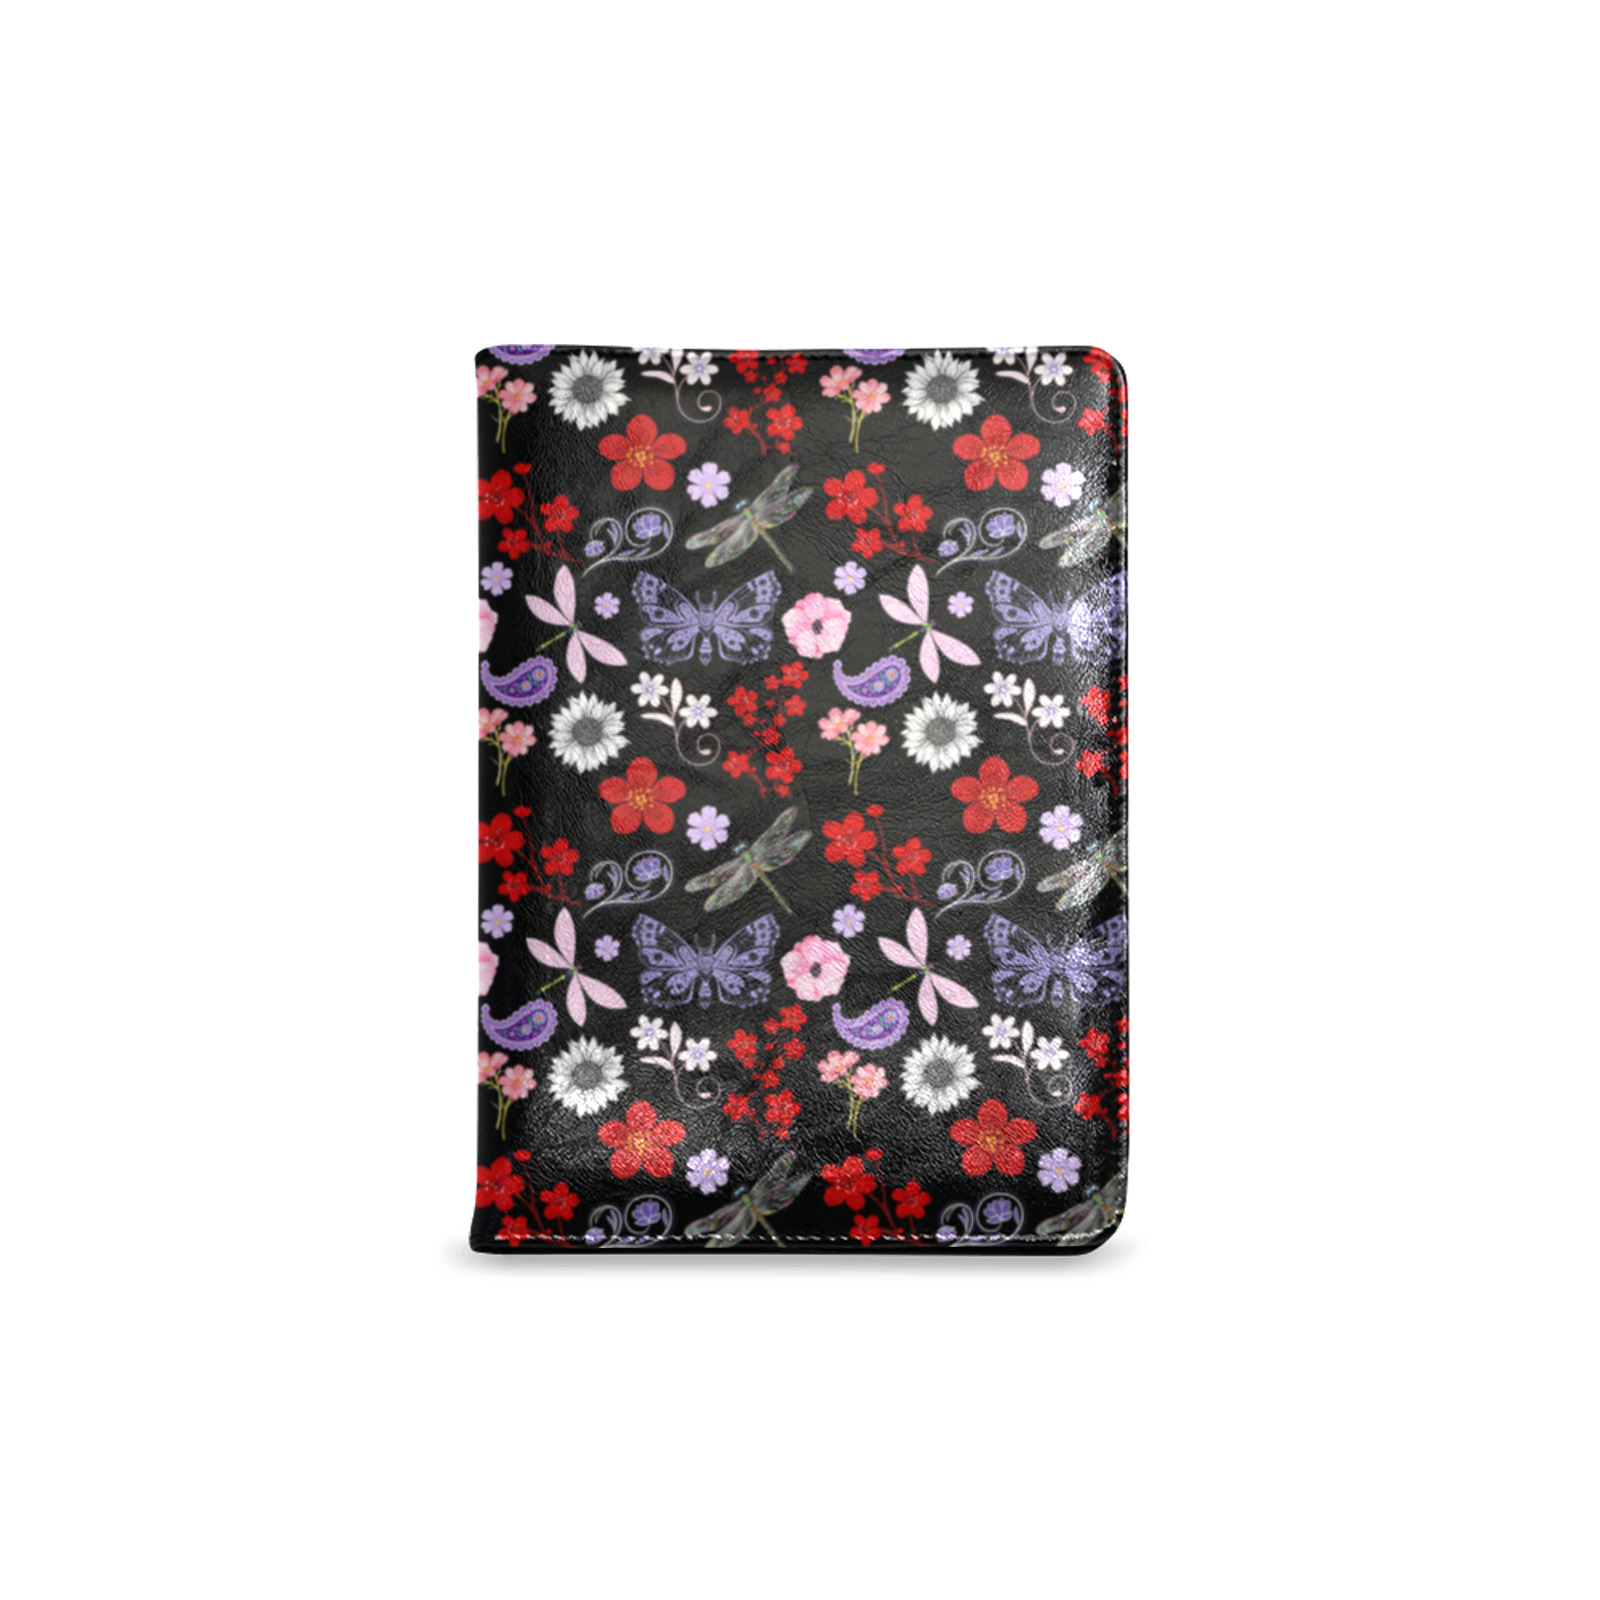 Black, Red, Pink, Purple, Dragonflies, Butterfly and Flowers Design Custom NoteBook A5